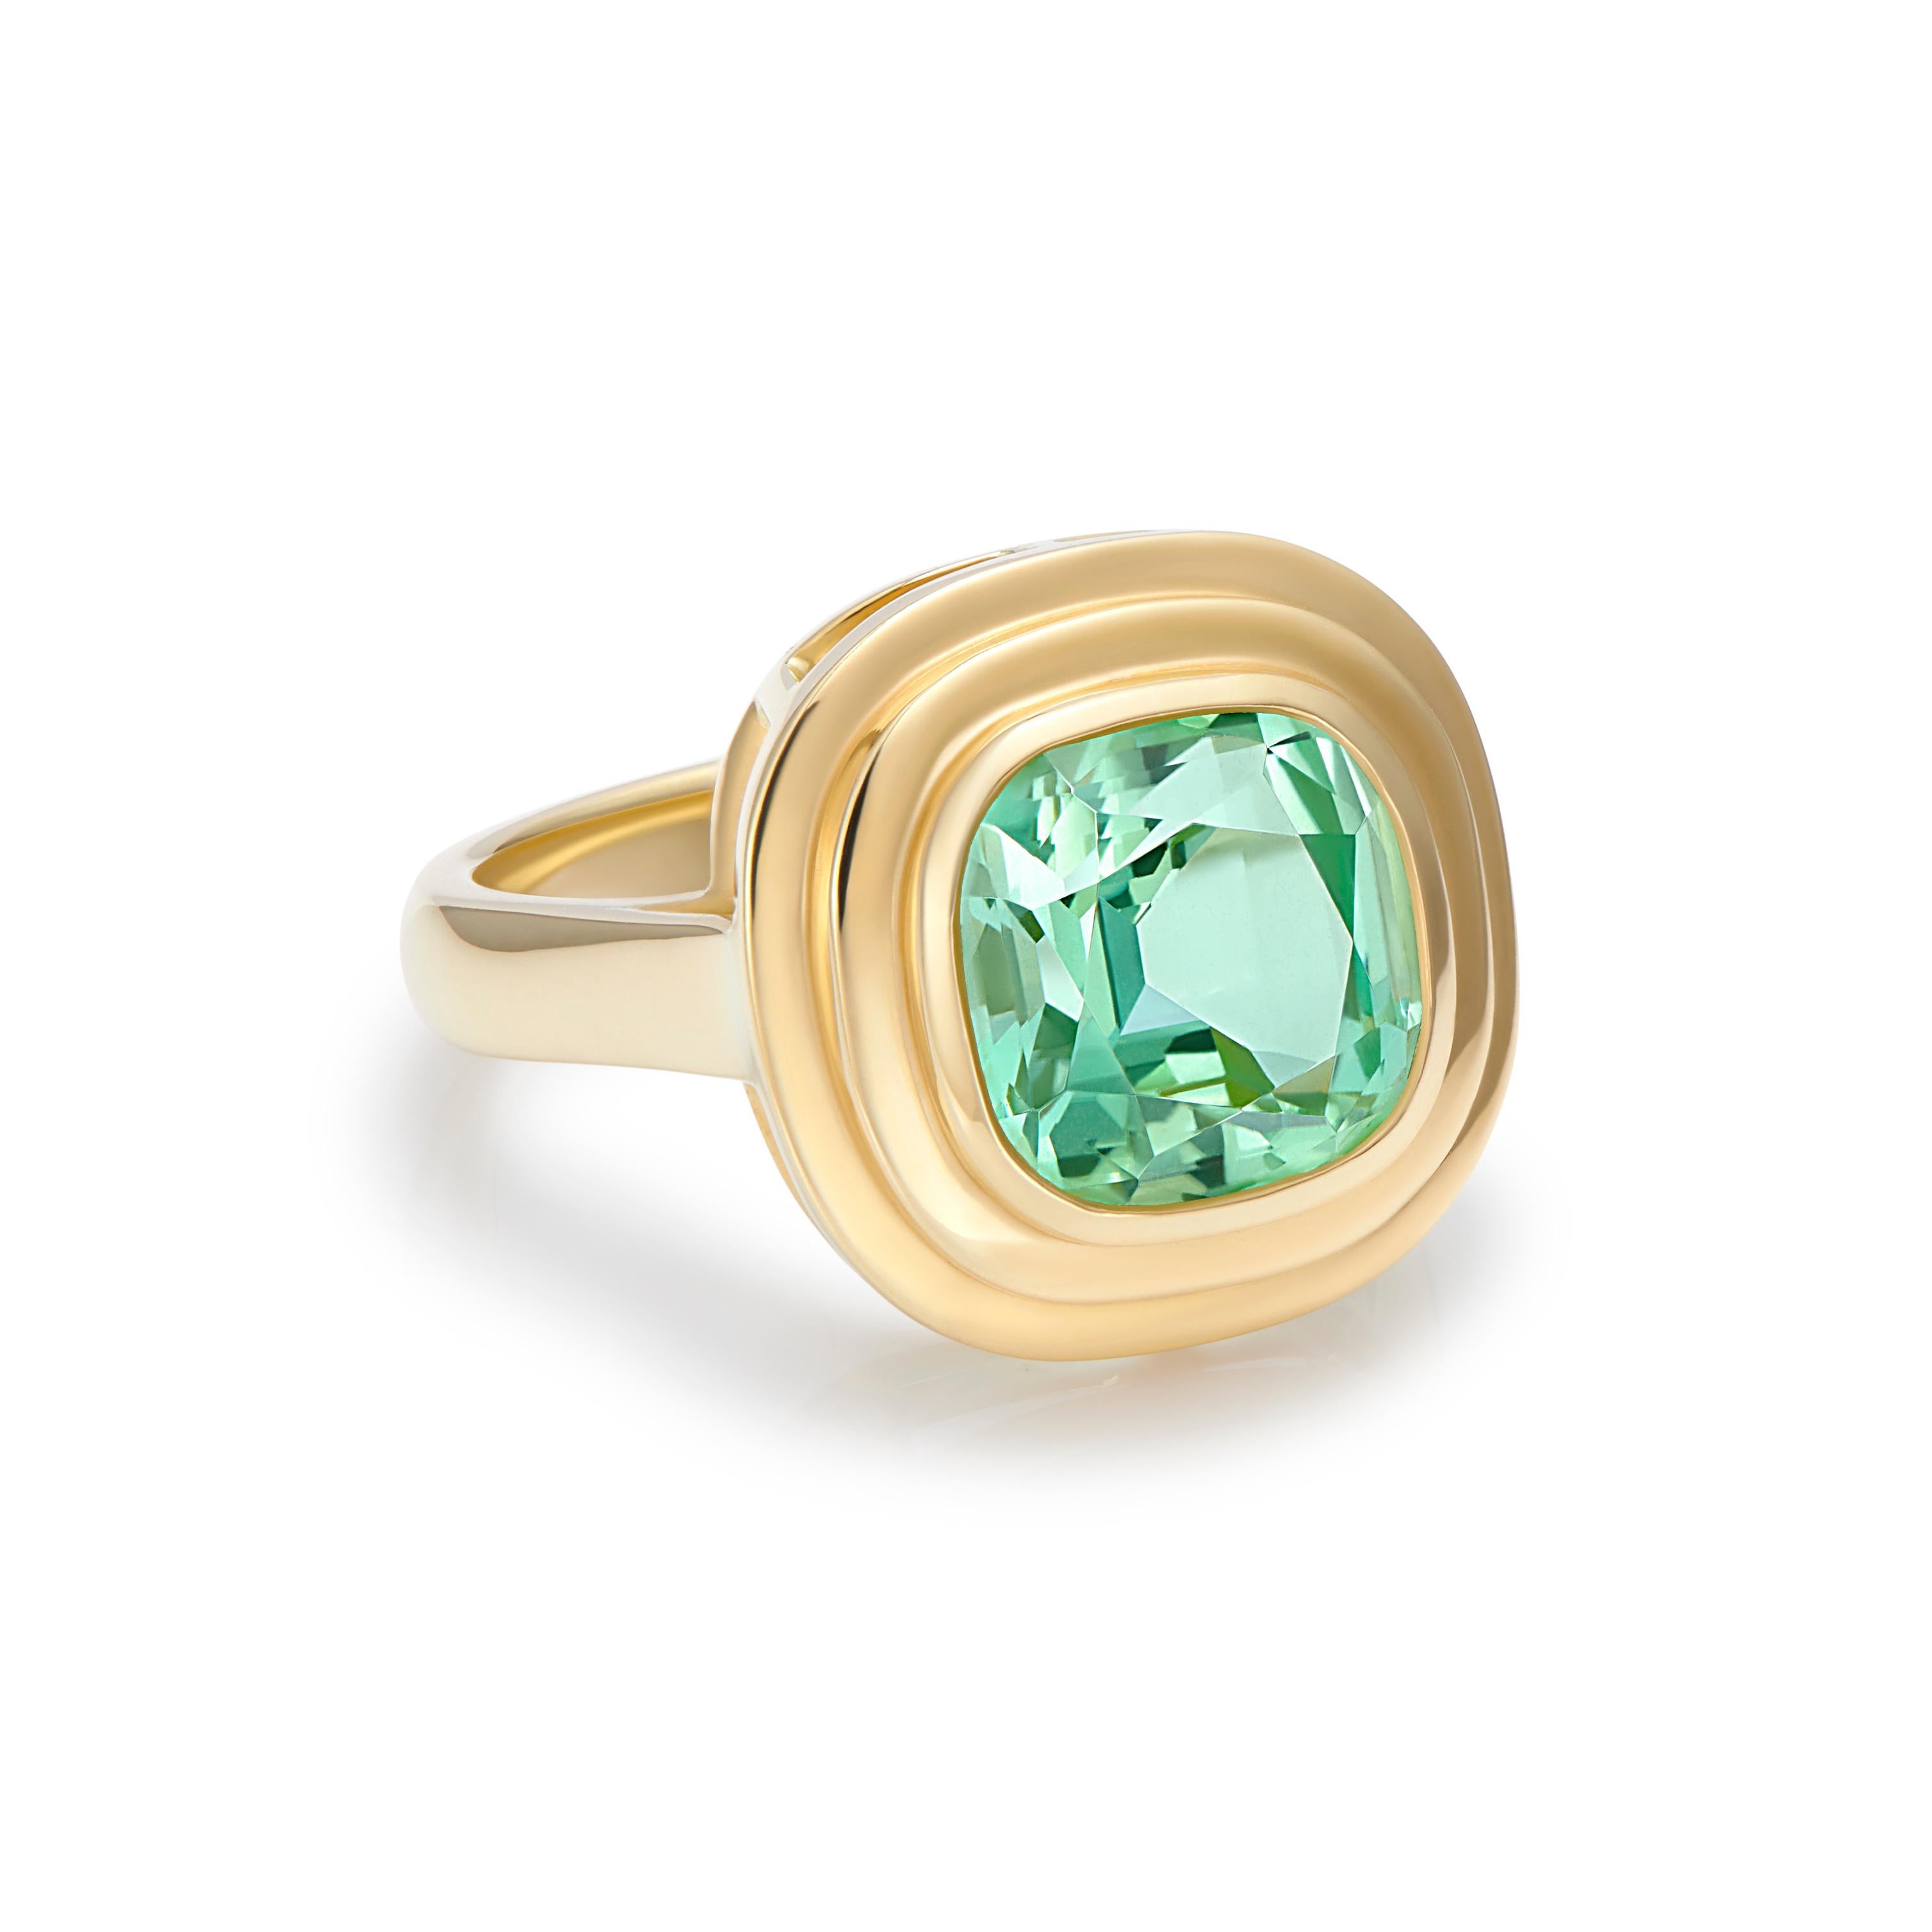 A stunning blue/green Tourmaline set into 18 karat yellow gold, Athena ring. 
Tourmaline comes in a variety of colours, green being the most popular and this gorgeous stone is a such an eye catching colour. 

Tourmaline is the birthstone for October